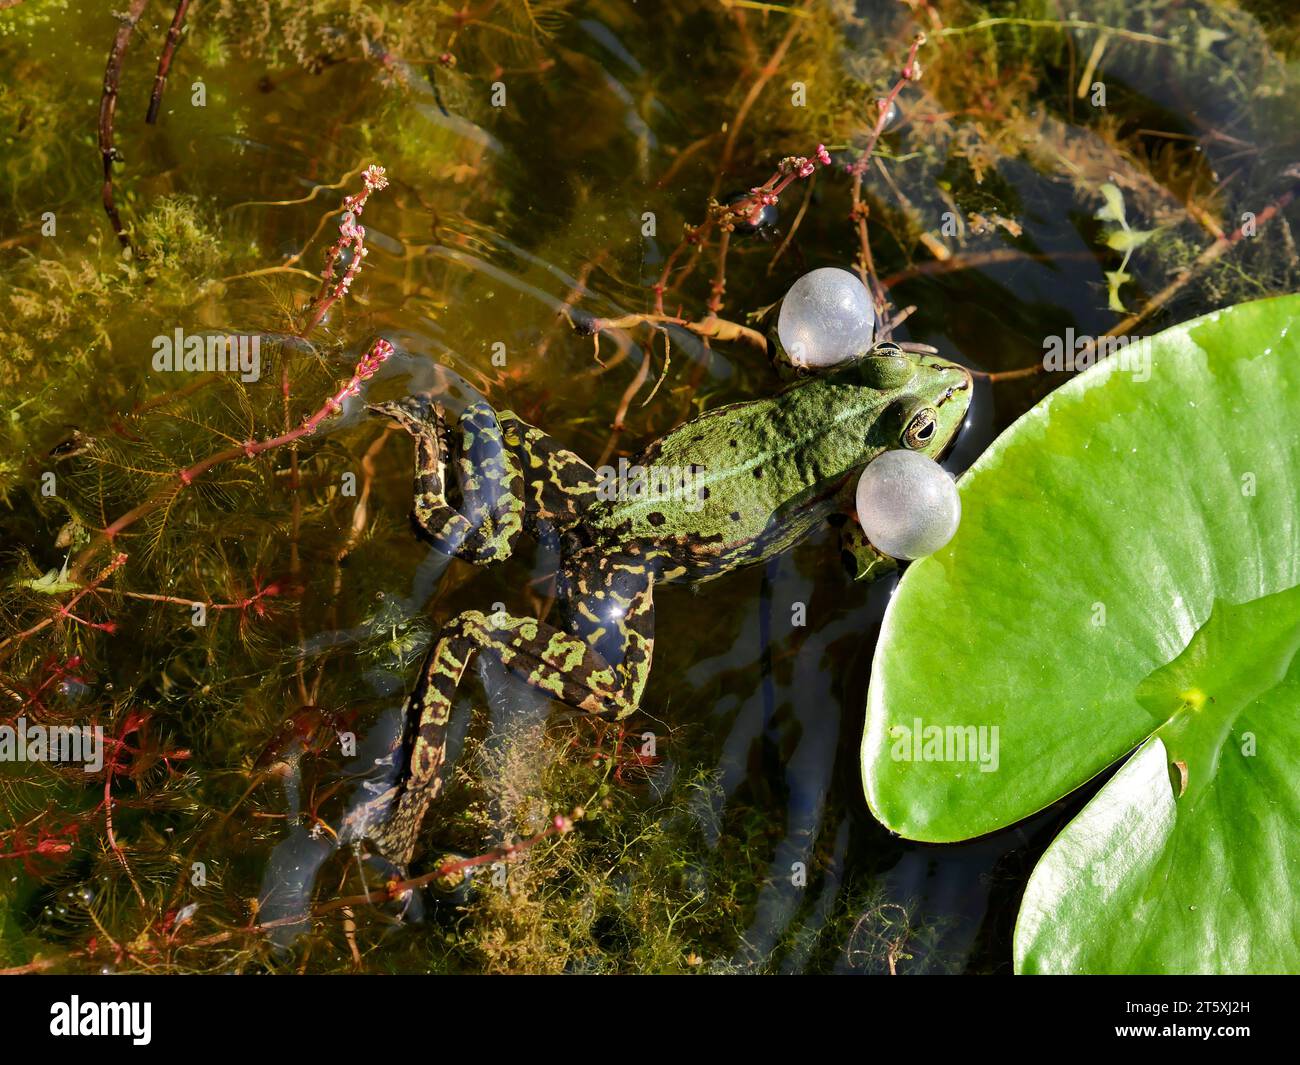 European green frog (edible frog, common water frog Pelophylax esculentus) croaking and swimming in a pond Stock Photo